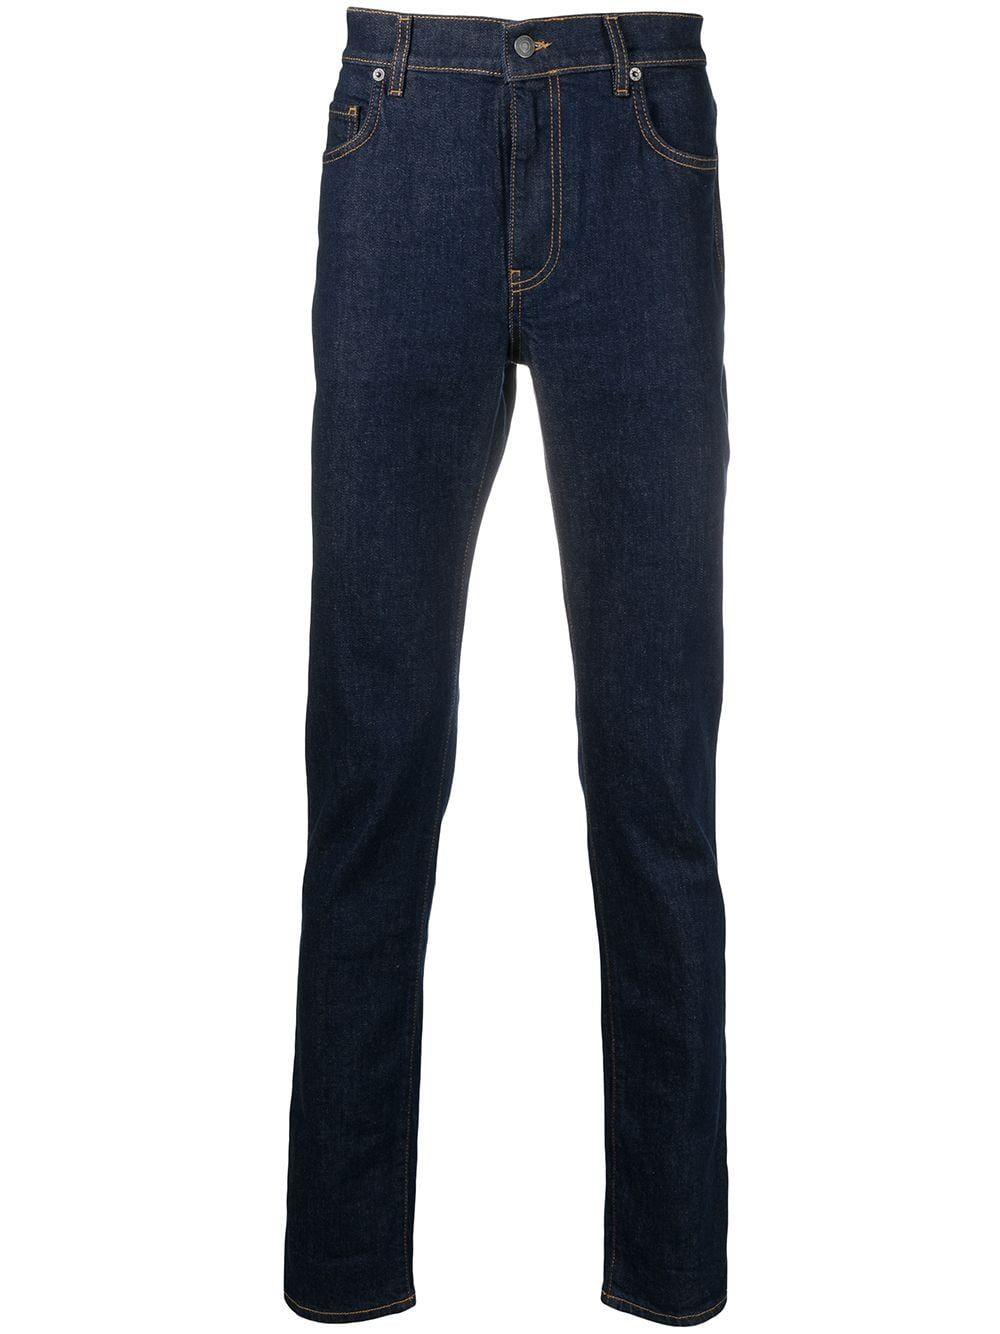 Moschino Denim Question Mark Embroidered Jeans in Blue for Men 